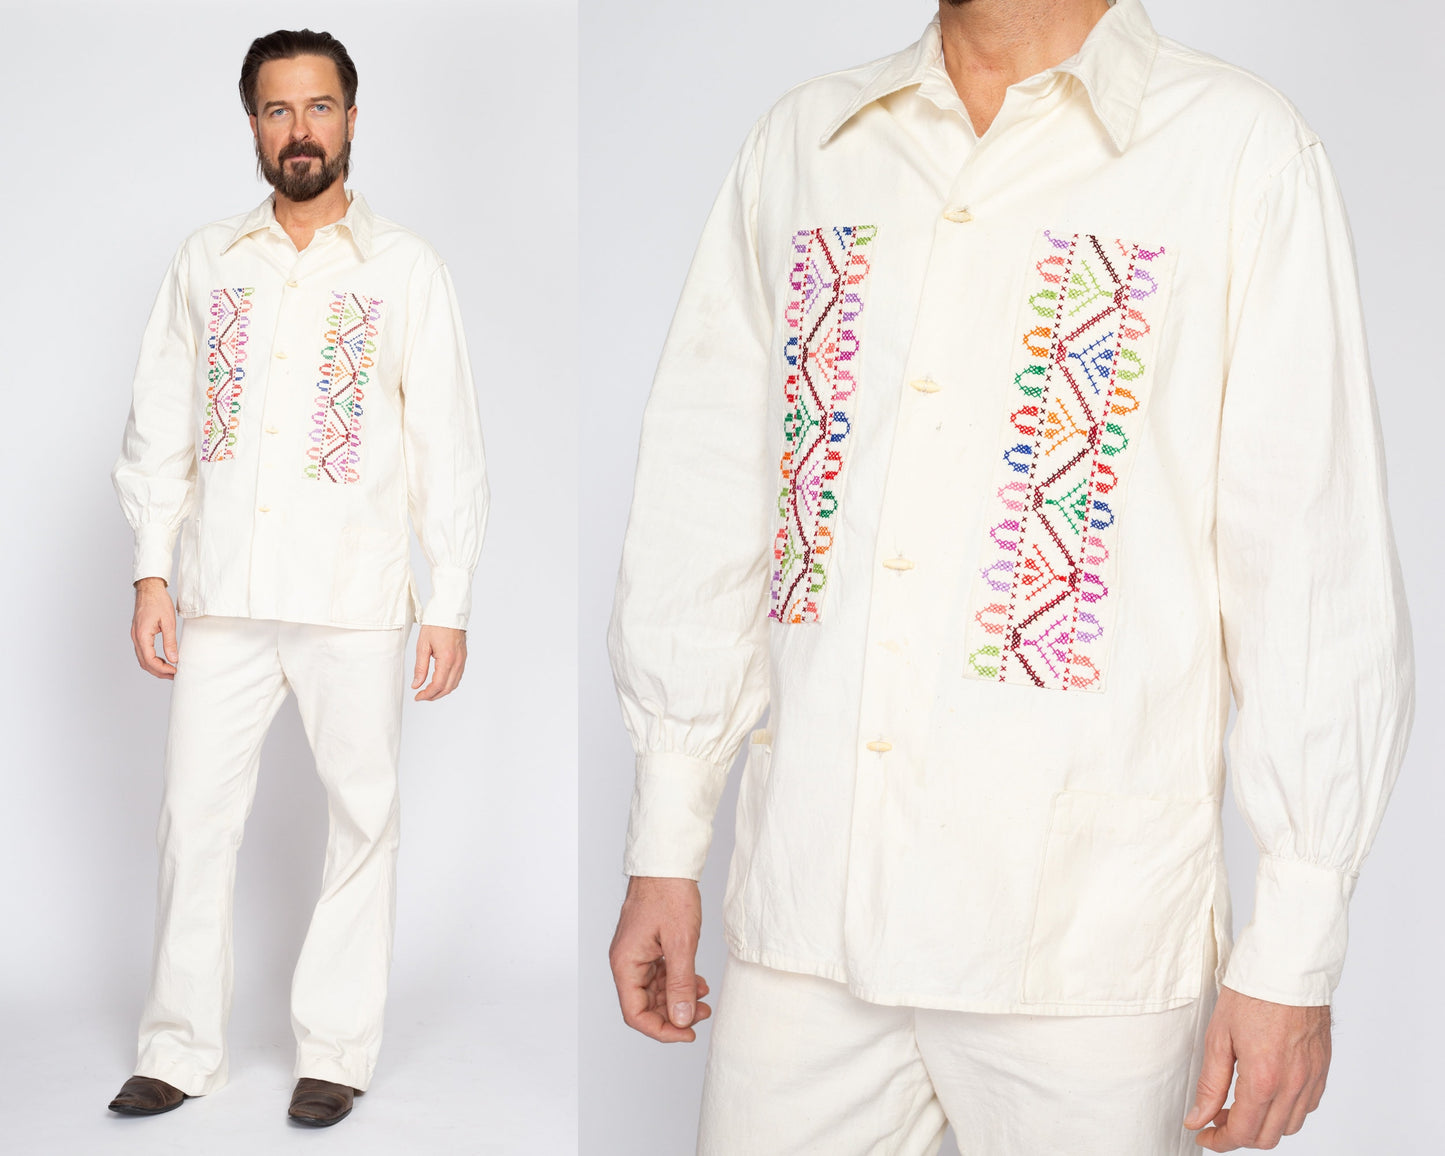 Medium 60s 70s Embroidered Mexican Shirt & Trousers Set 35" Waist | Vintage White Cotton Toggle Button Up Matching Two Piece Hippie Outfit